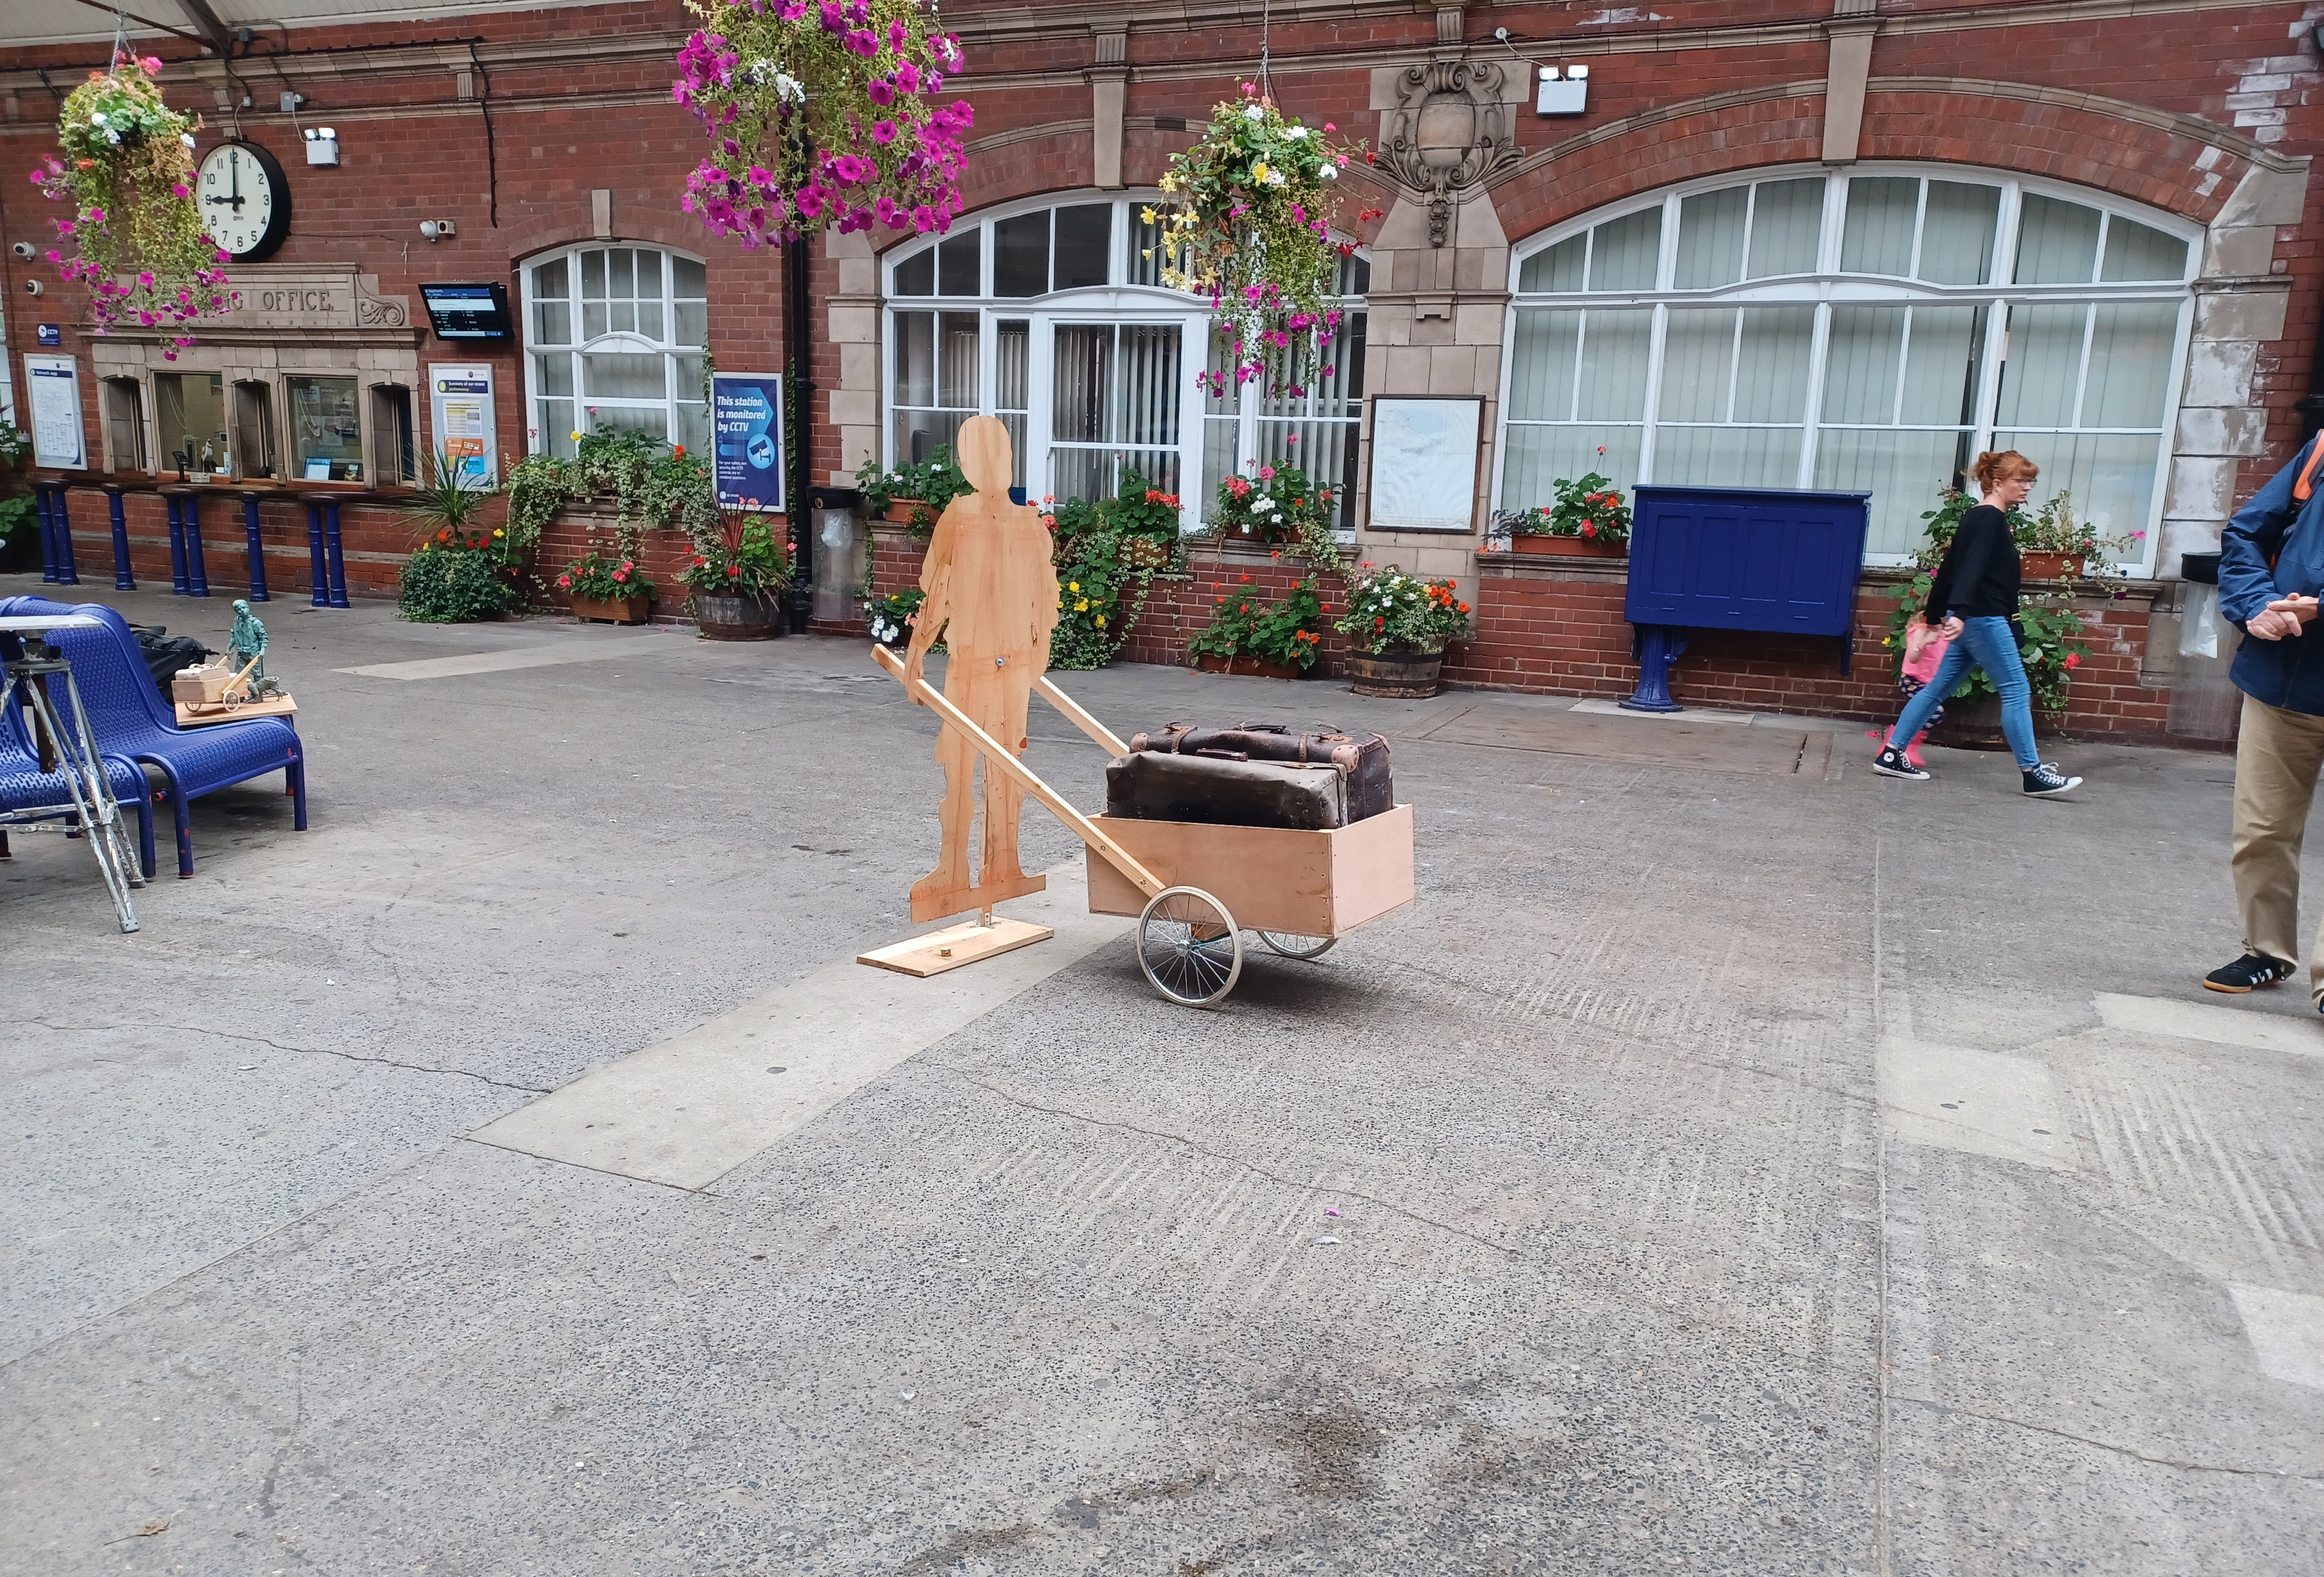 this-image-shows-the-scale-model-of-the-barrow-boy-sculpture-at-bridlington